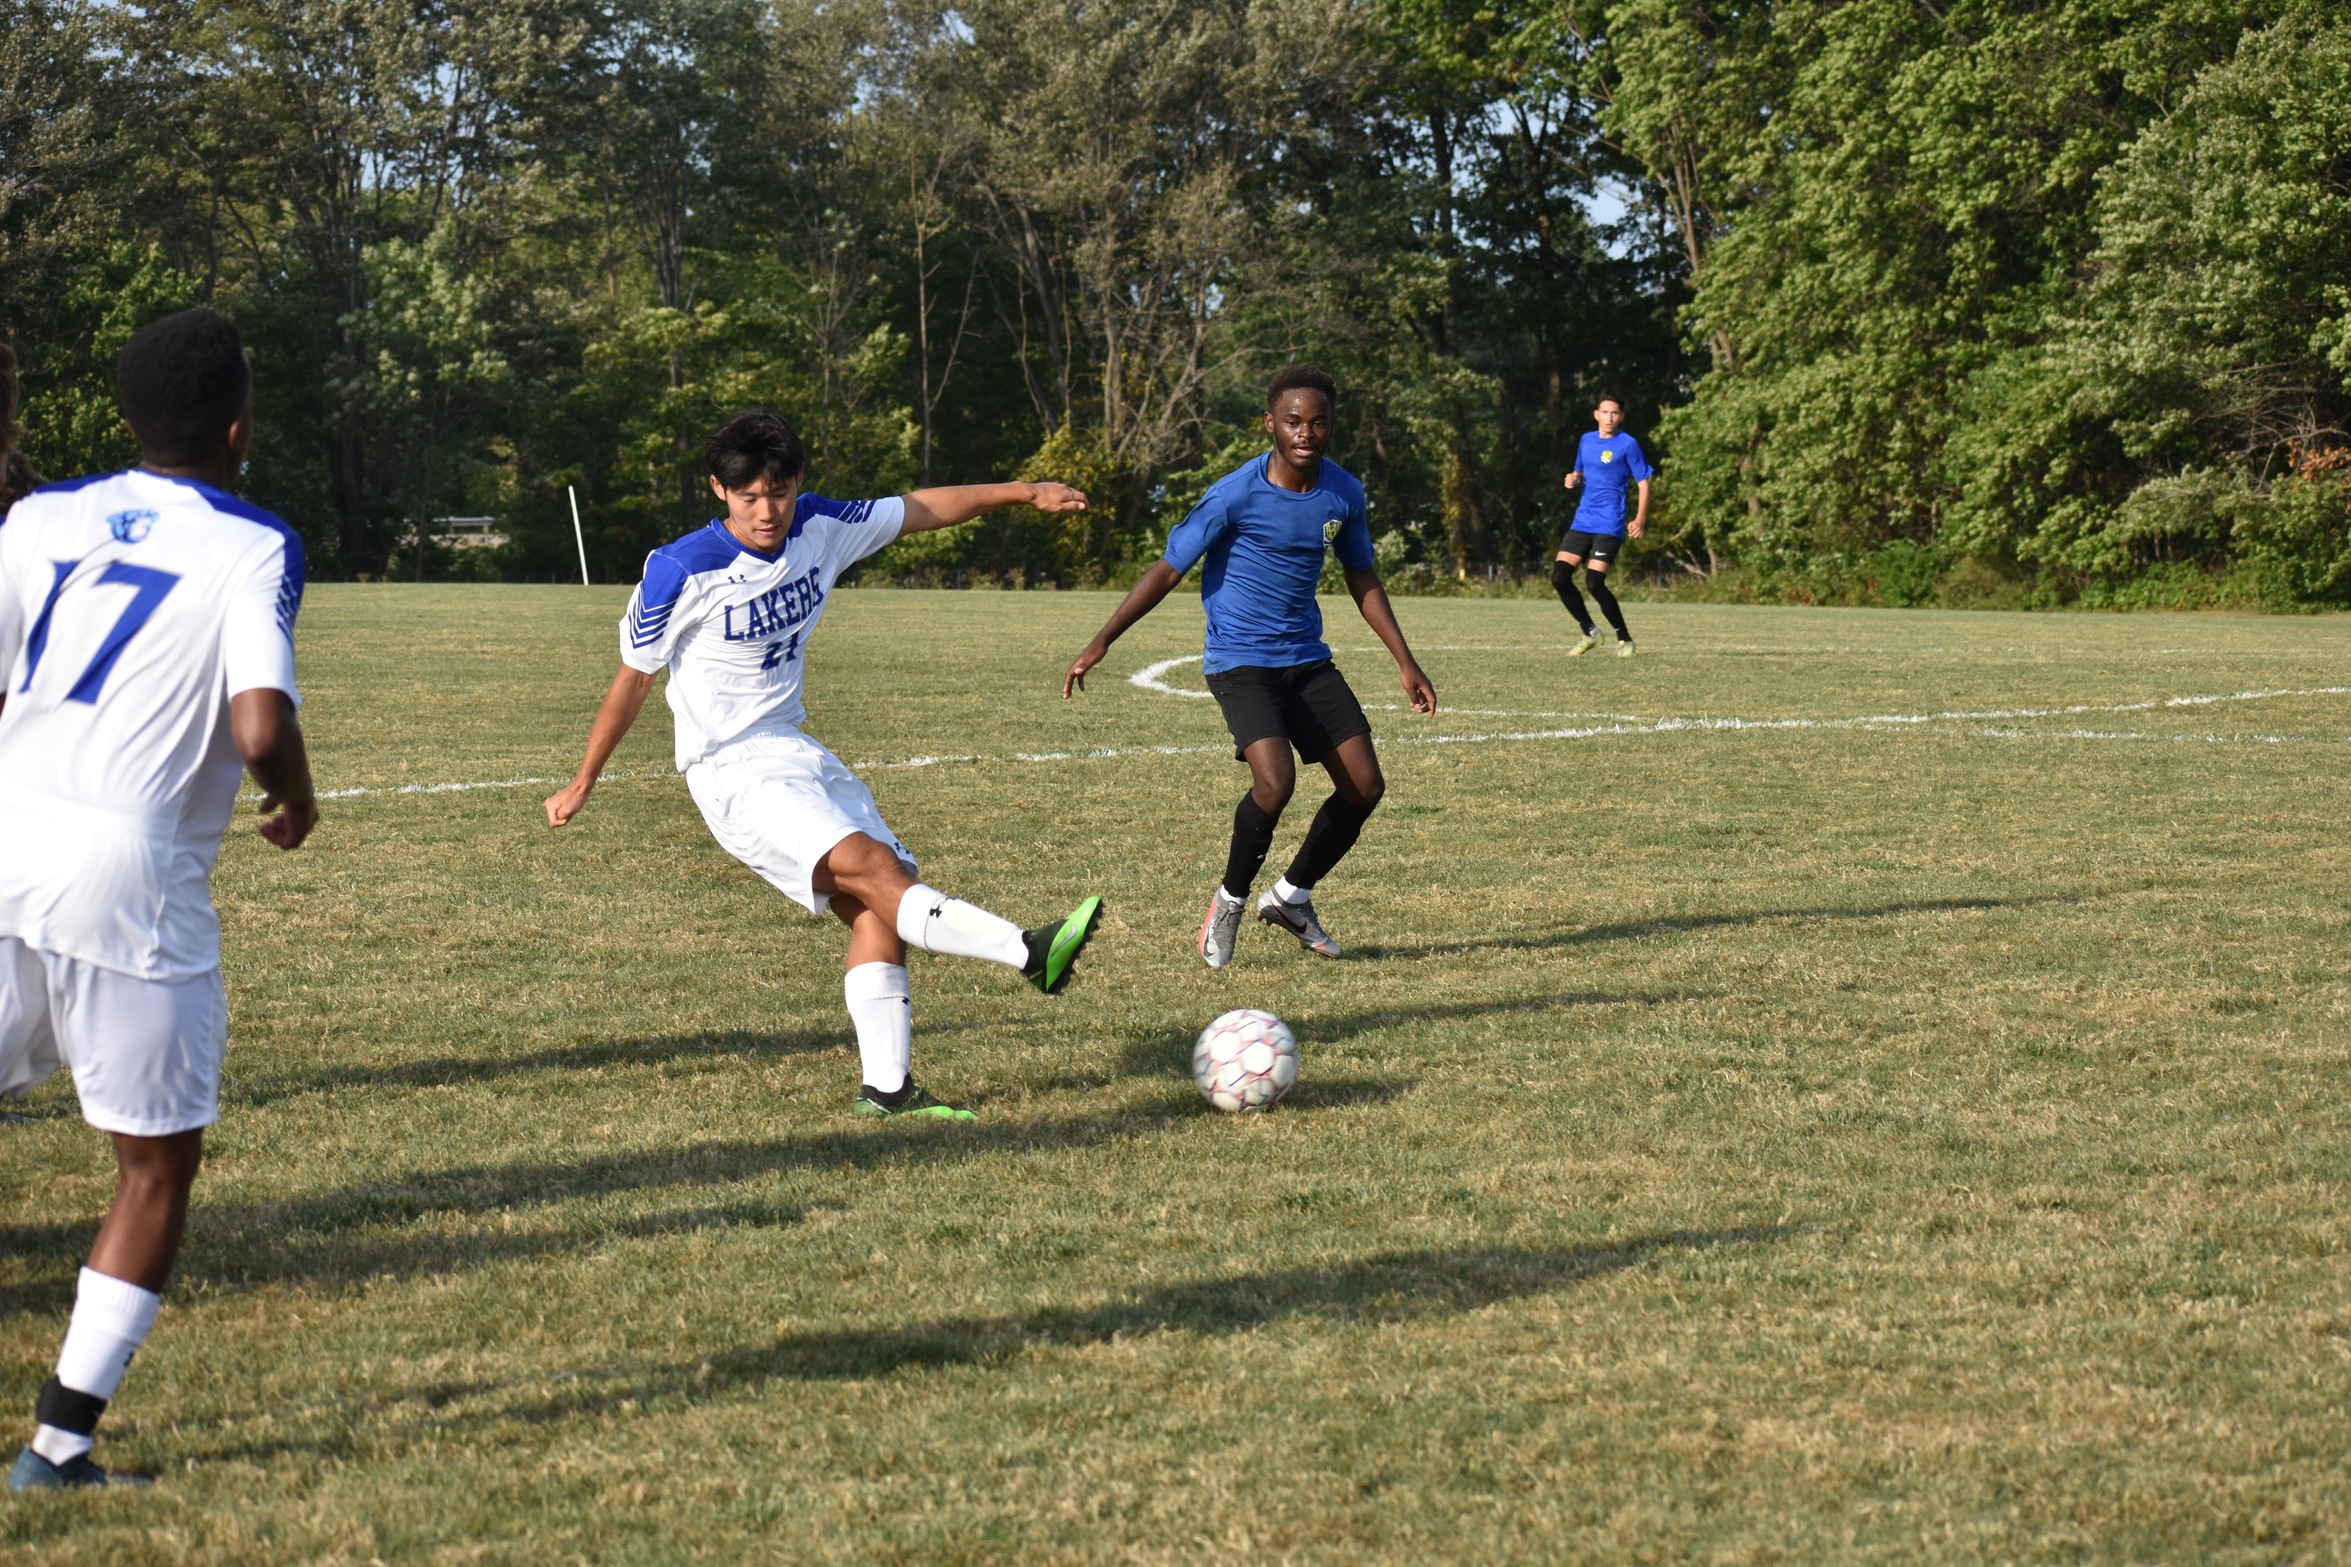 Lakers men's soccer drops first match to Ocelots